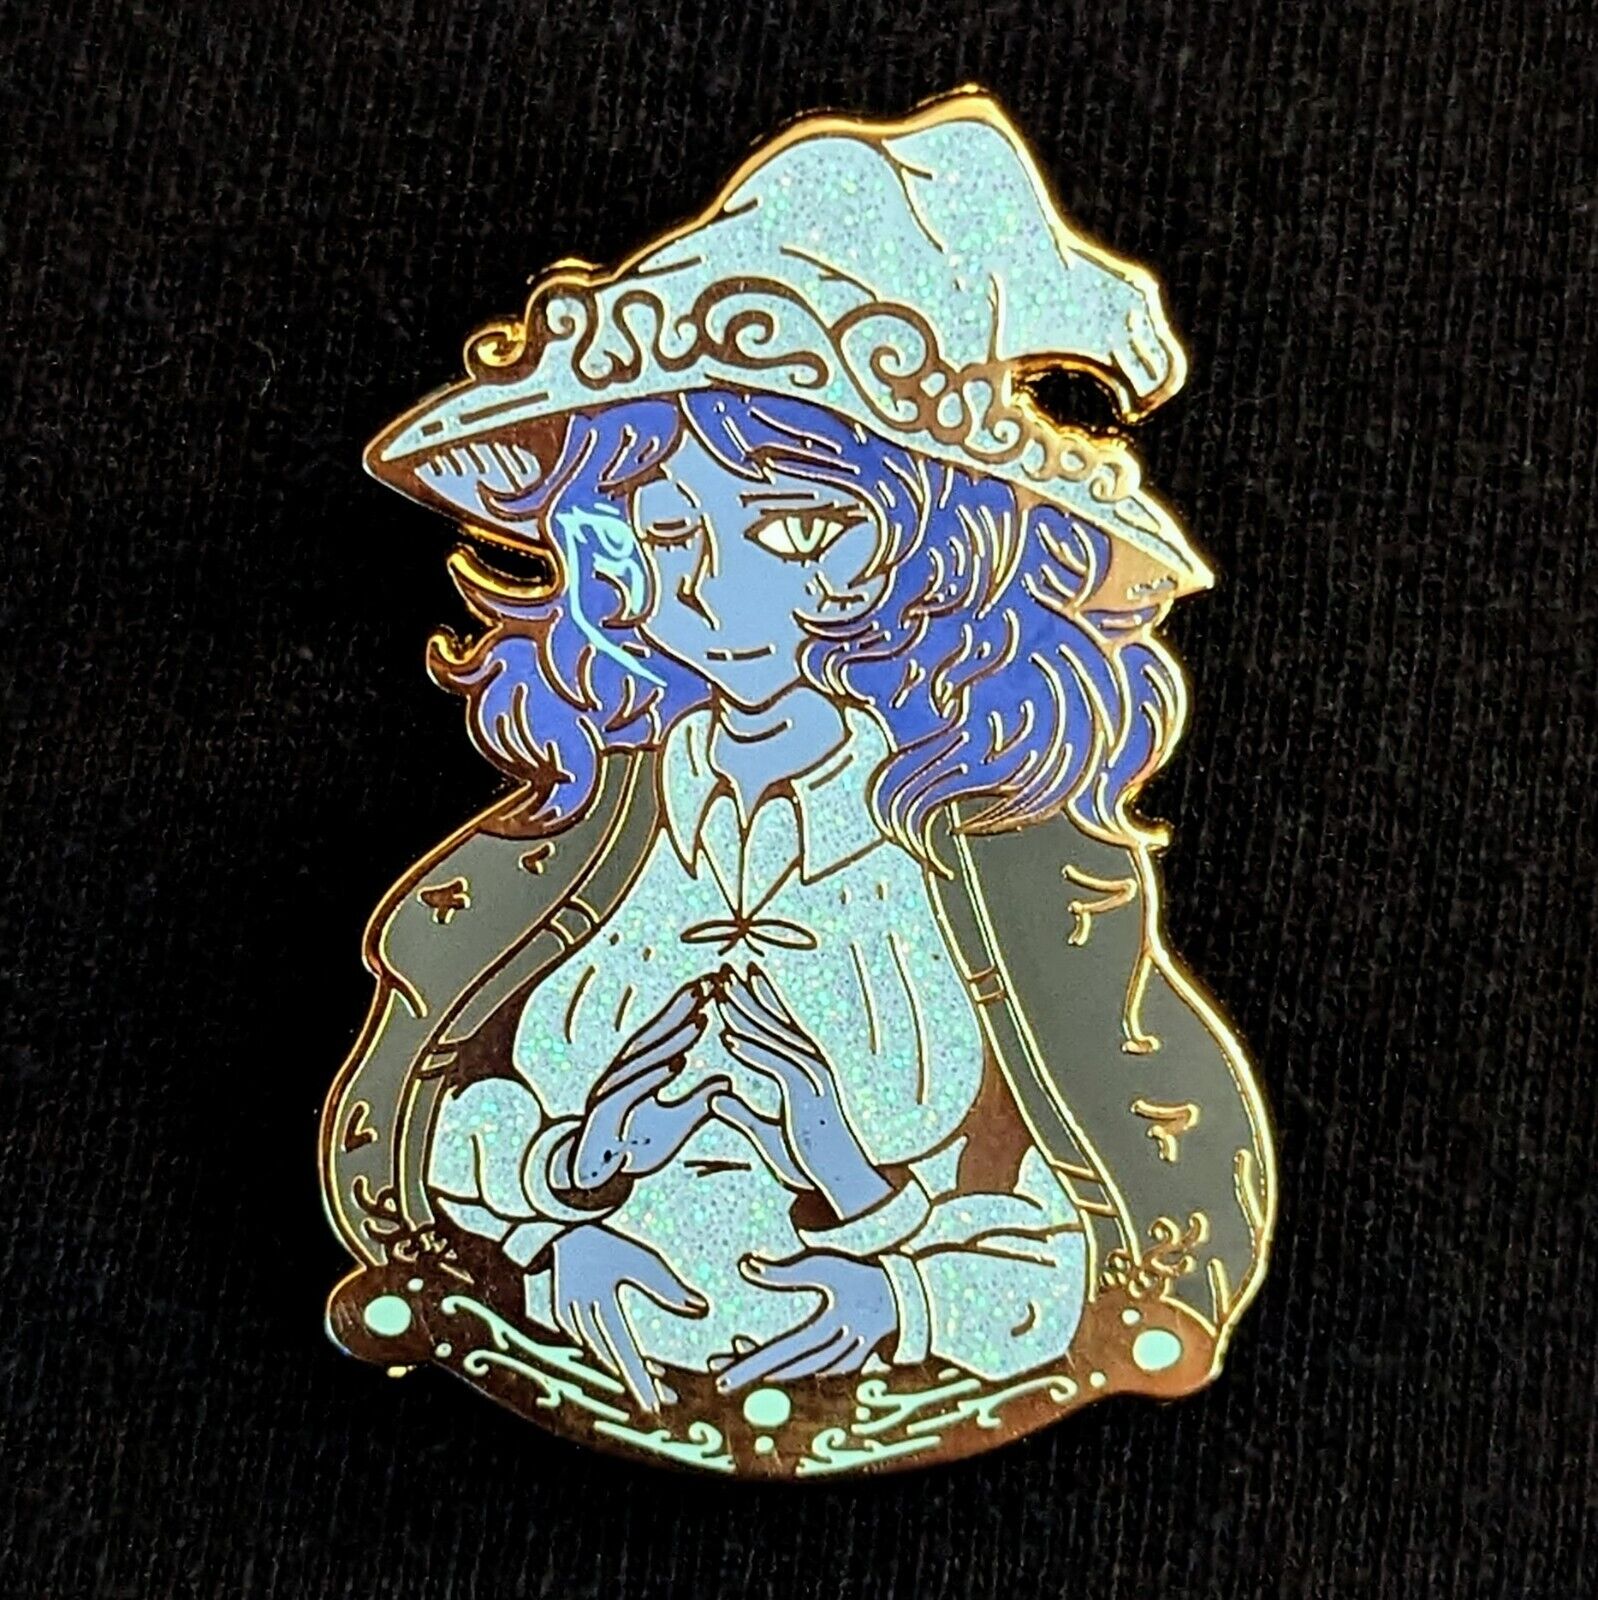 Elden Ring Ranni The Witch Verdant Succubus / Vileworm Souls Game Artist Pin